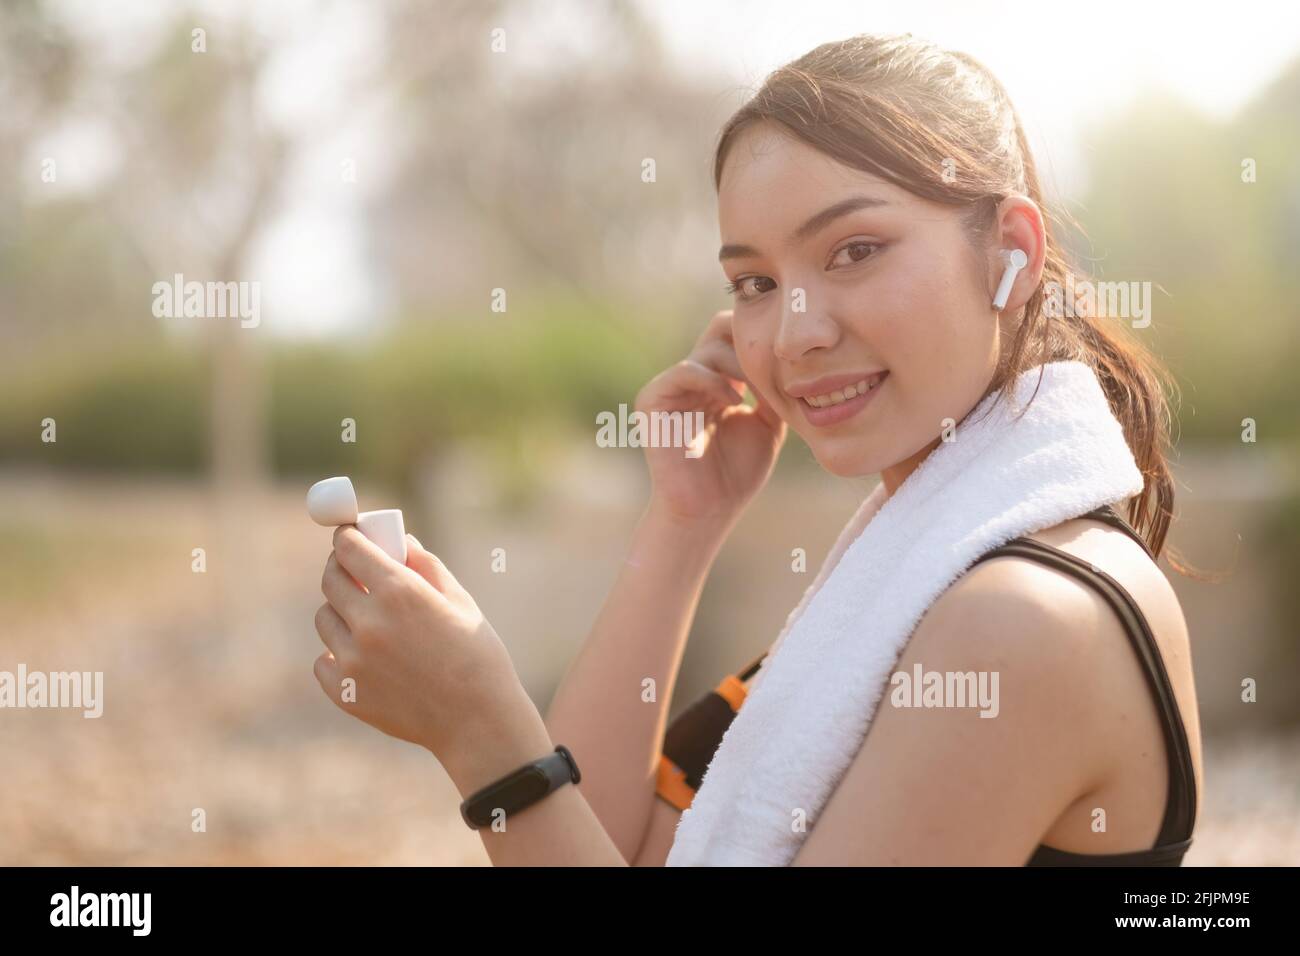 Photo of a beautiful asian young fitness woman running outdoors listening music with earphones Stock Photo